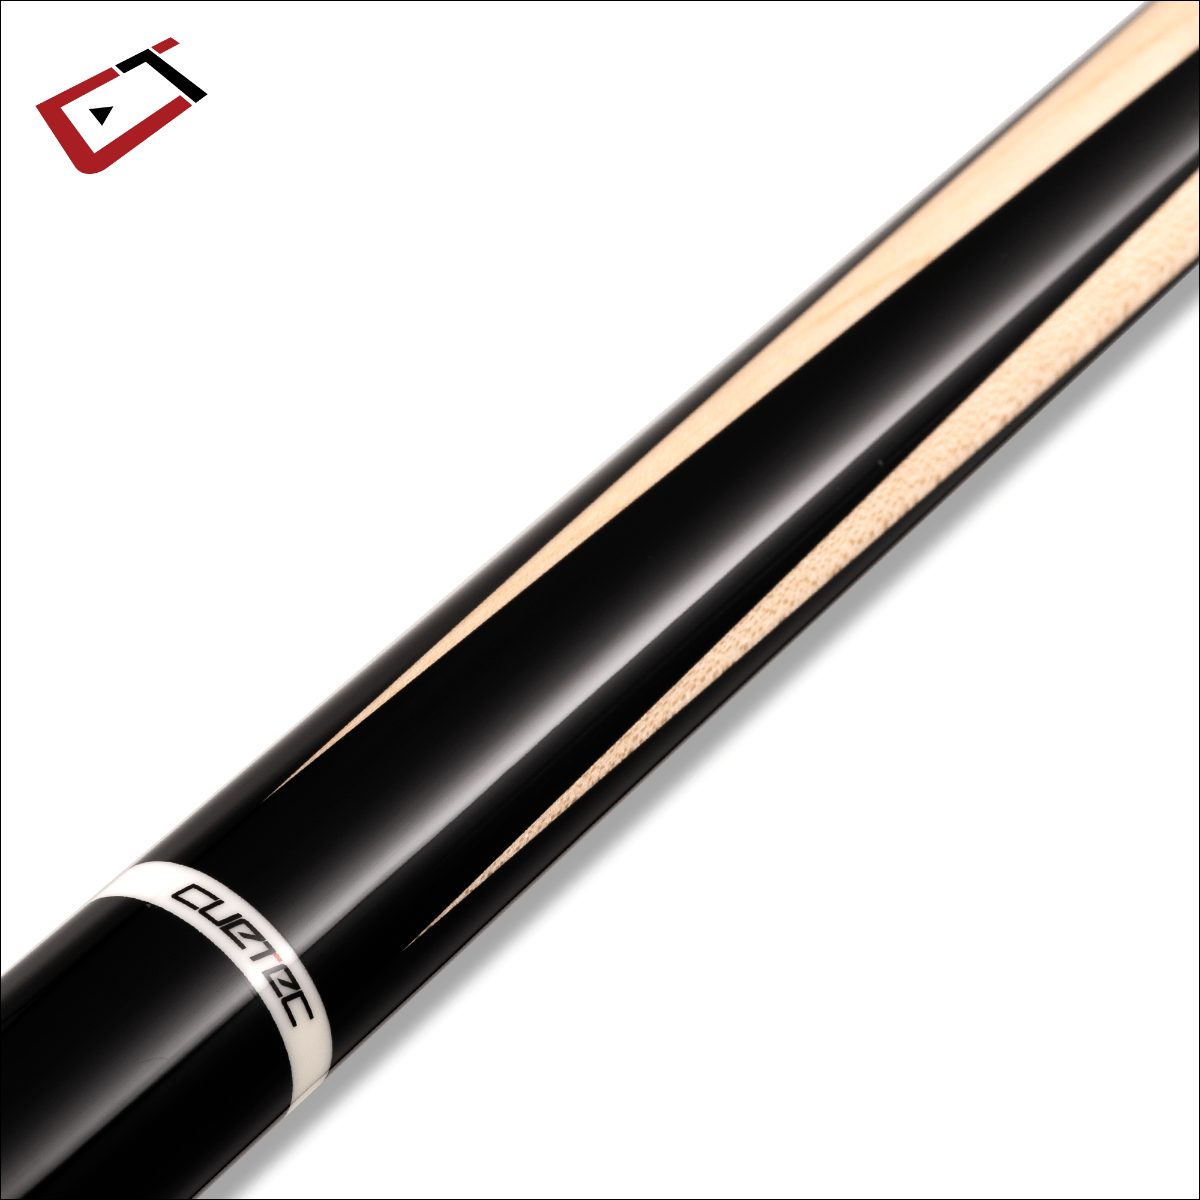 Imperial Pool Cue Imperial - AVID ERA Natural 4 PT Cue NW 11.75MM - 95-321NW-S